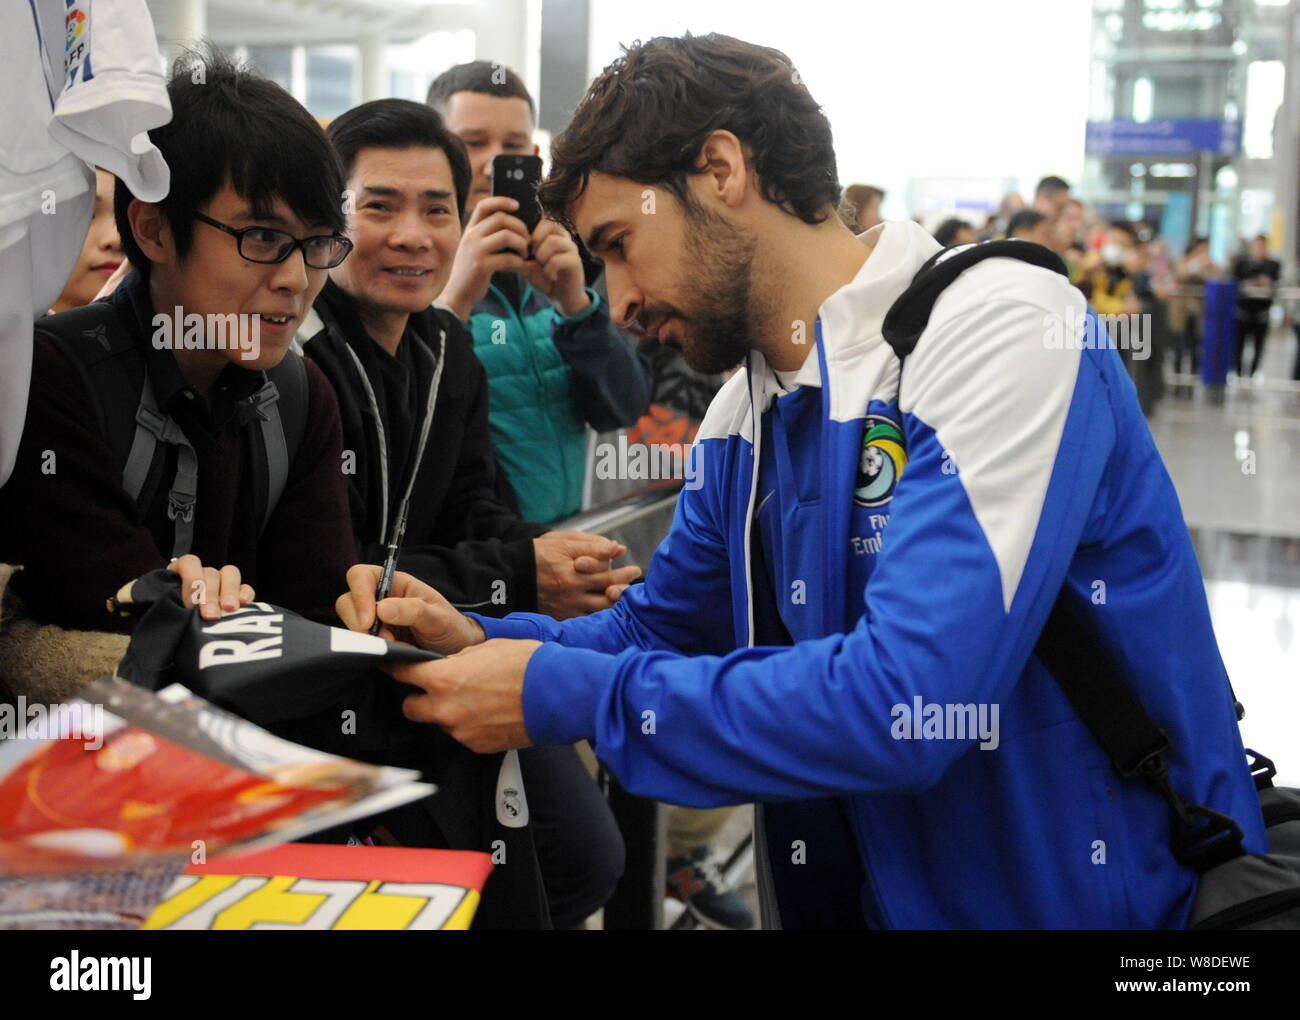 Spanish football star Raul Gonzalez Blanco of New York Cosmos, right, signs autographs for fans as he arrives at the Hong Kong International Airport i Stock Photo